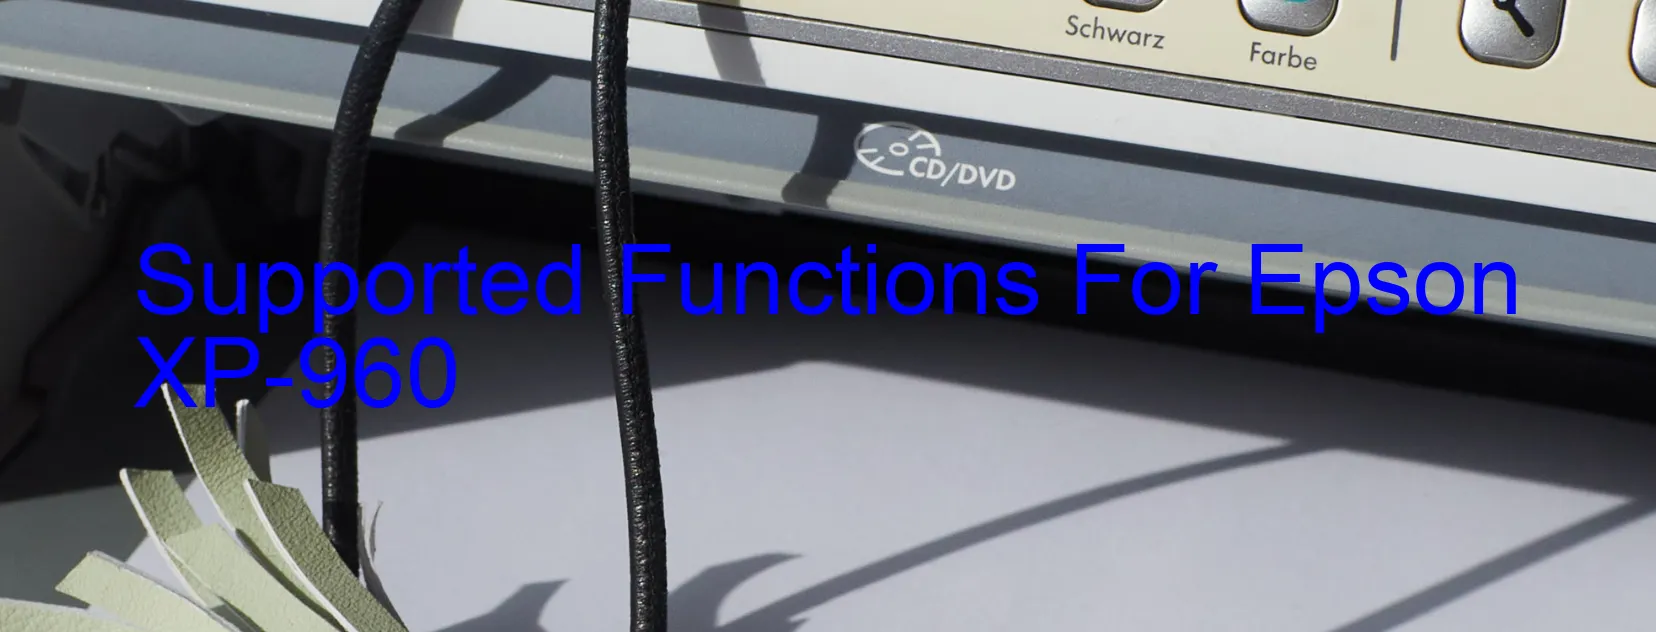 supported-functions-for-epson-xp-960.webp